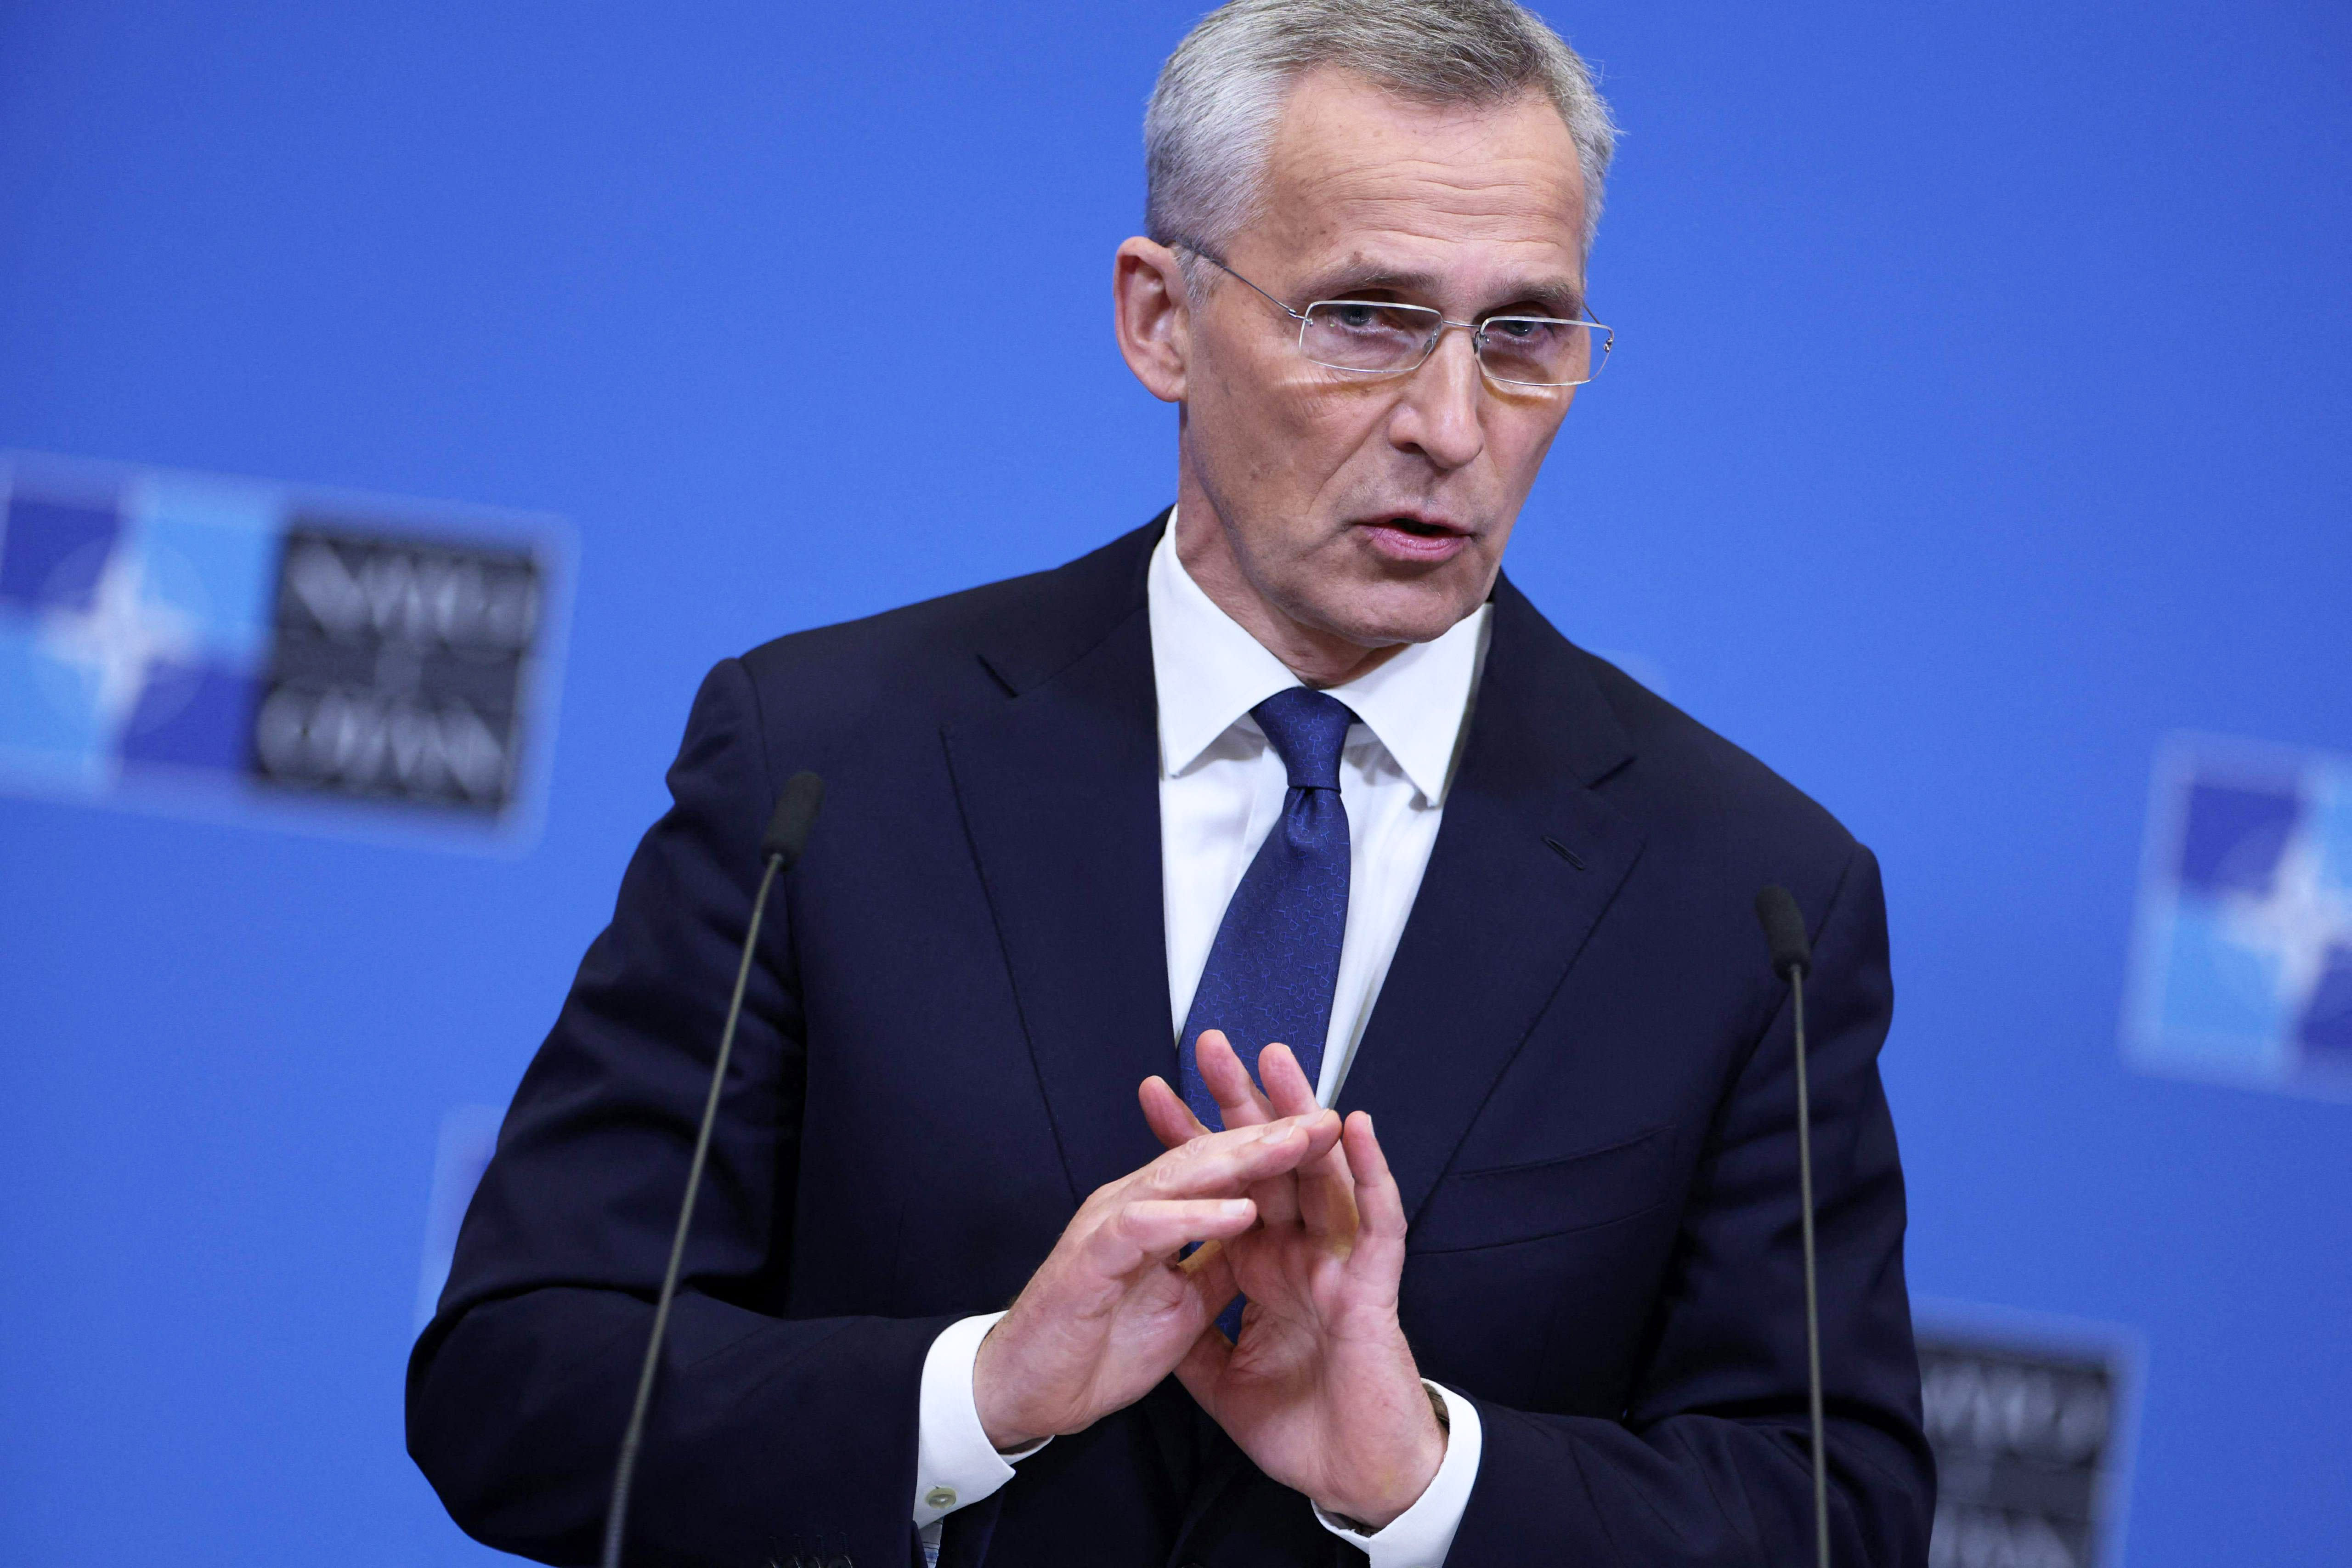 NATO chief: The decision on Finland’s membership can be quick